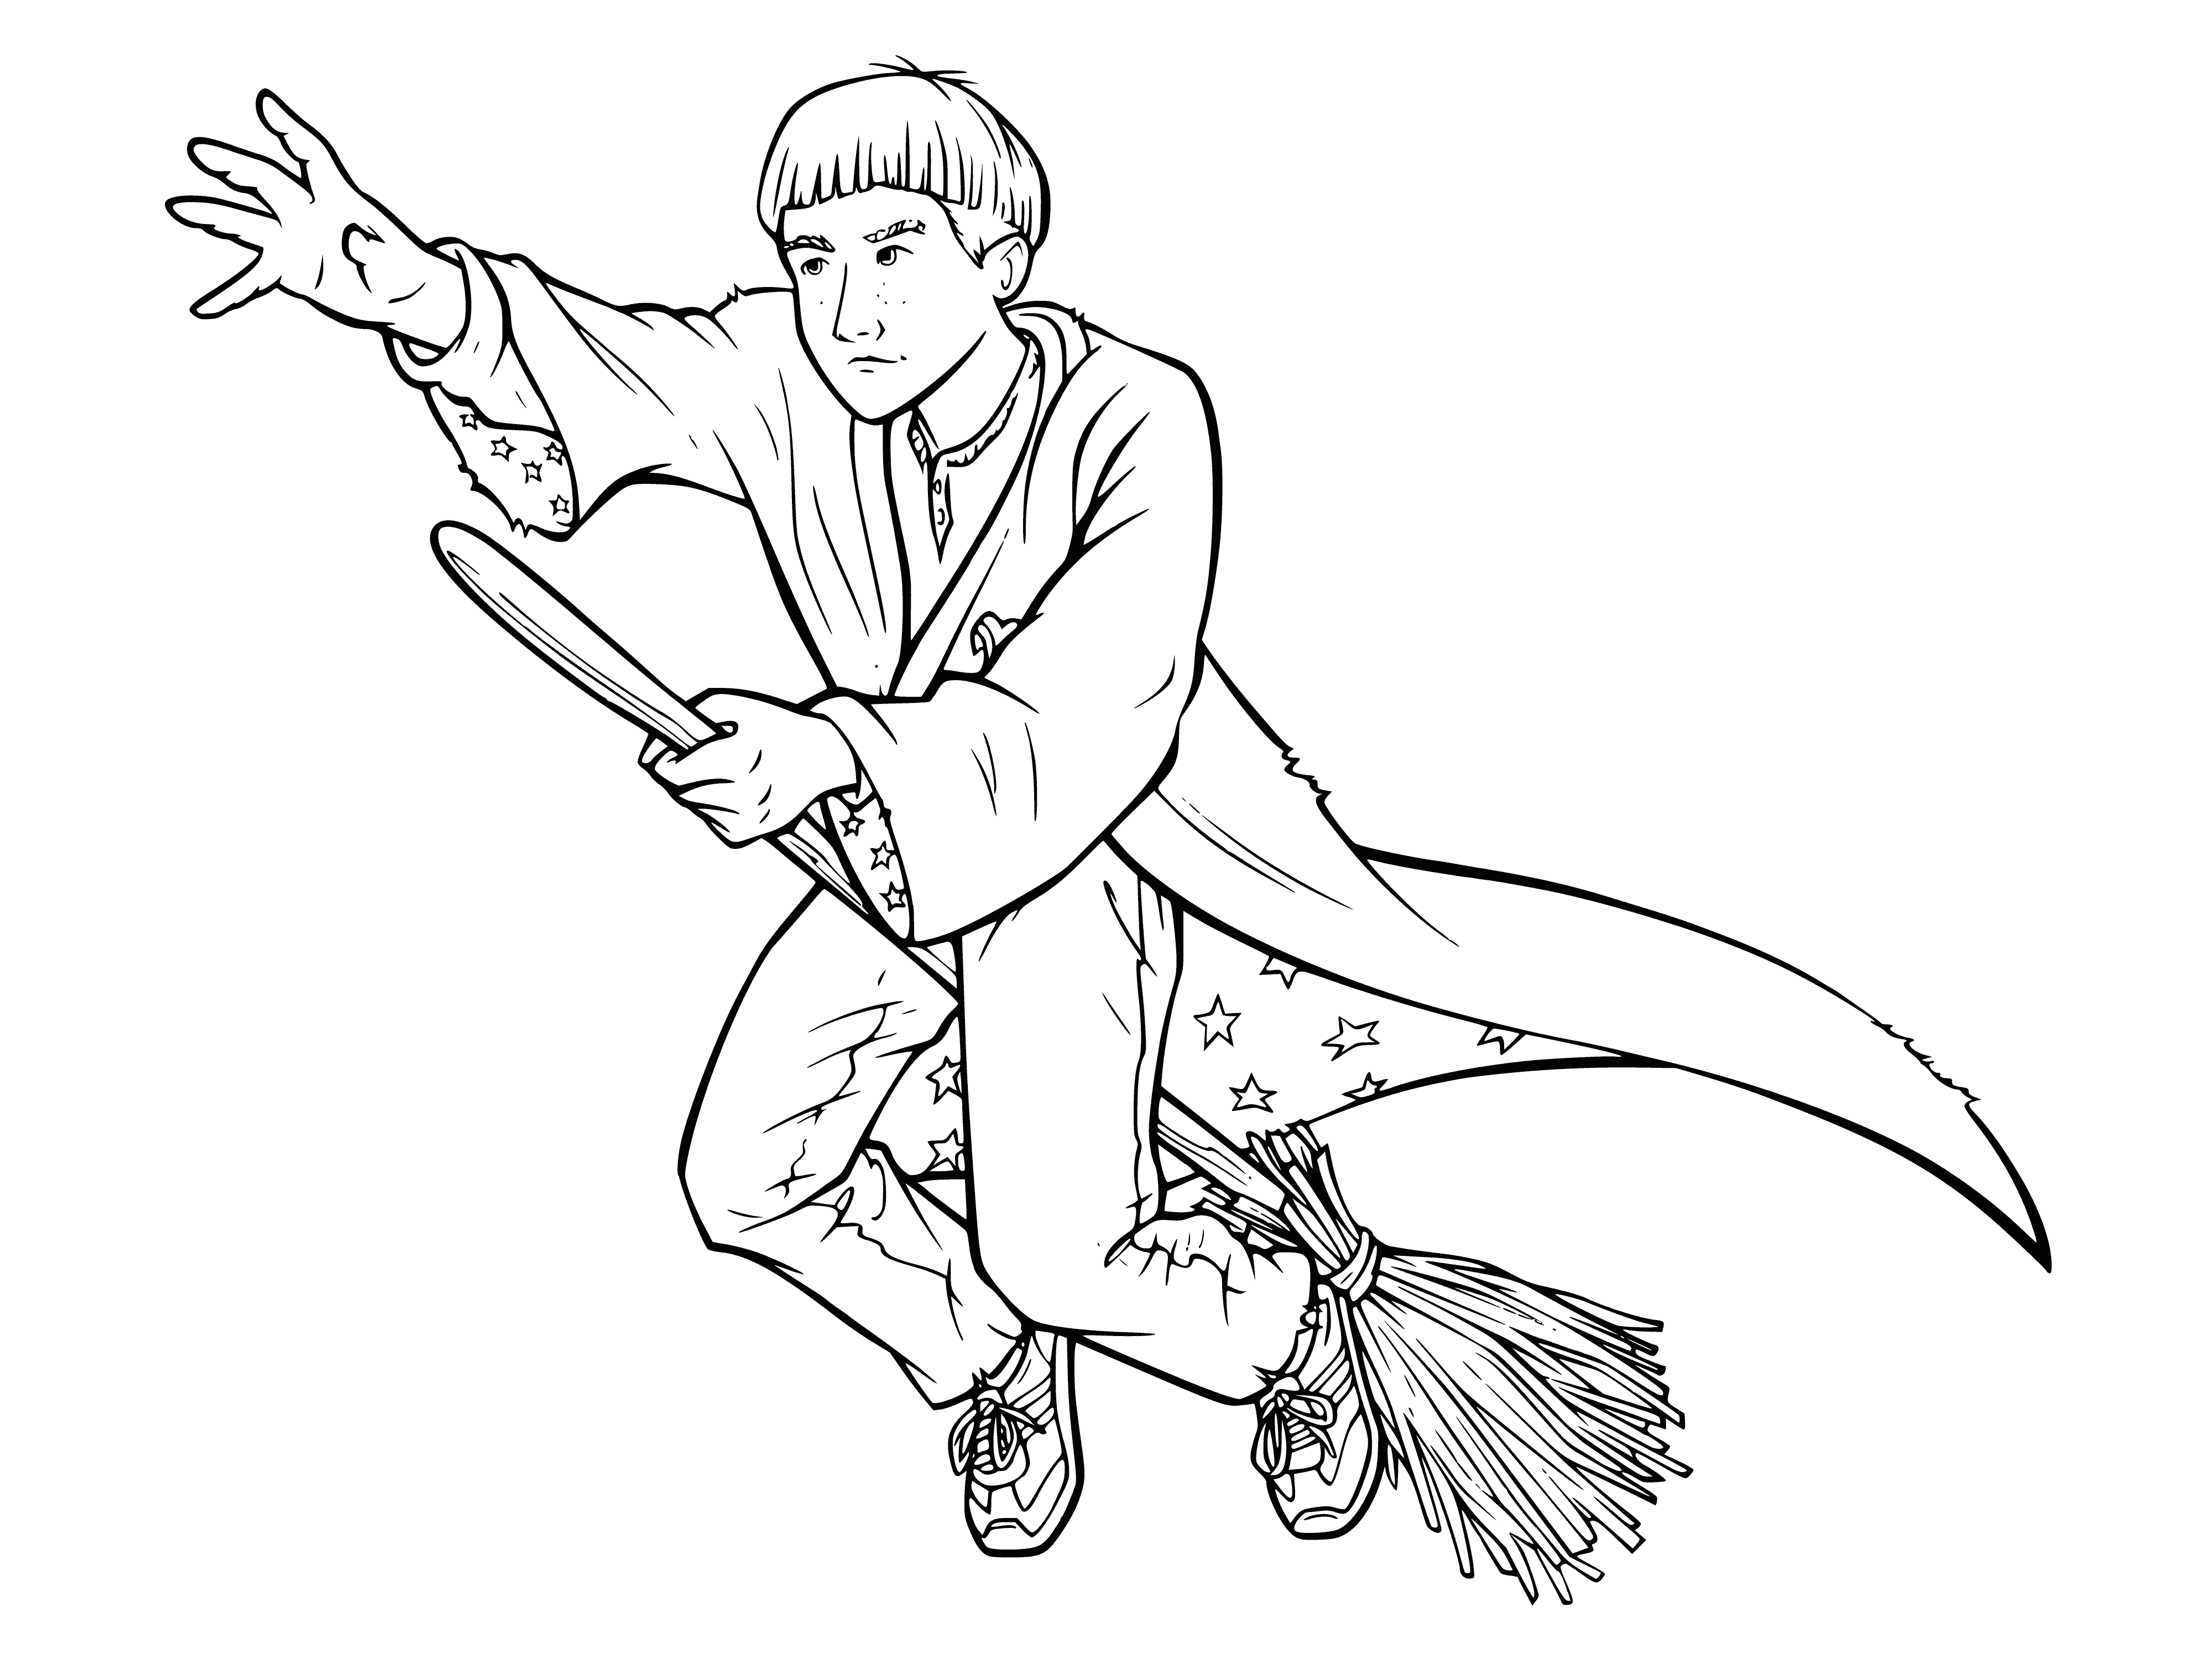 coloring page: Harry & Ron are flying on a broom, wearing black robes with hoods up. Harry's hair is blowing as they soar through the air.